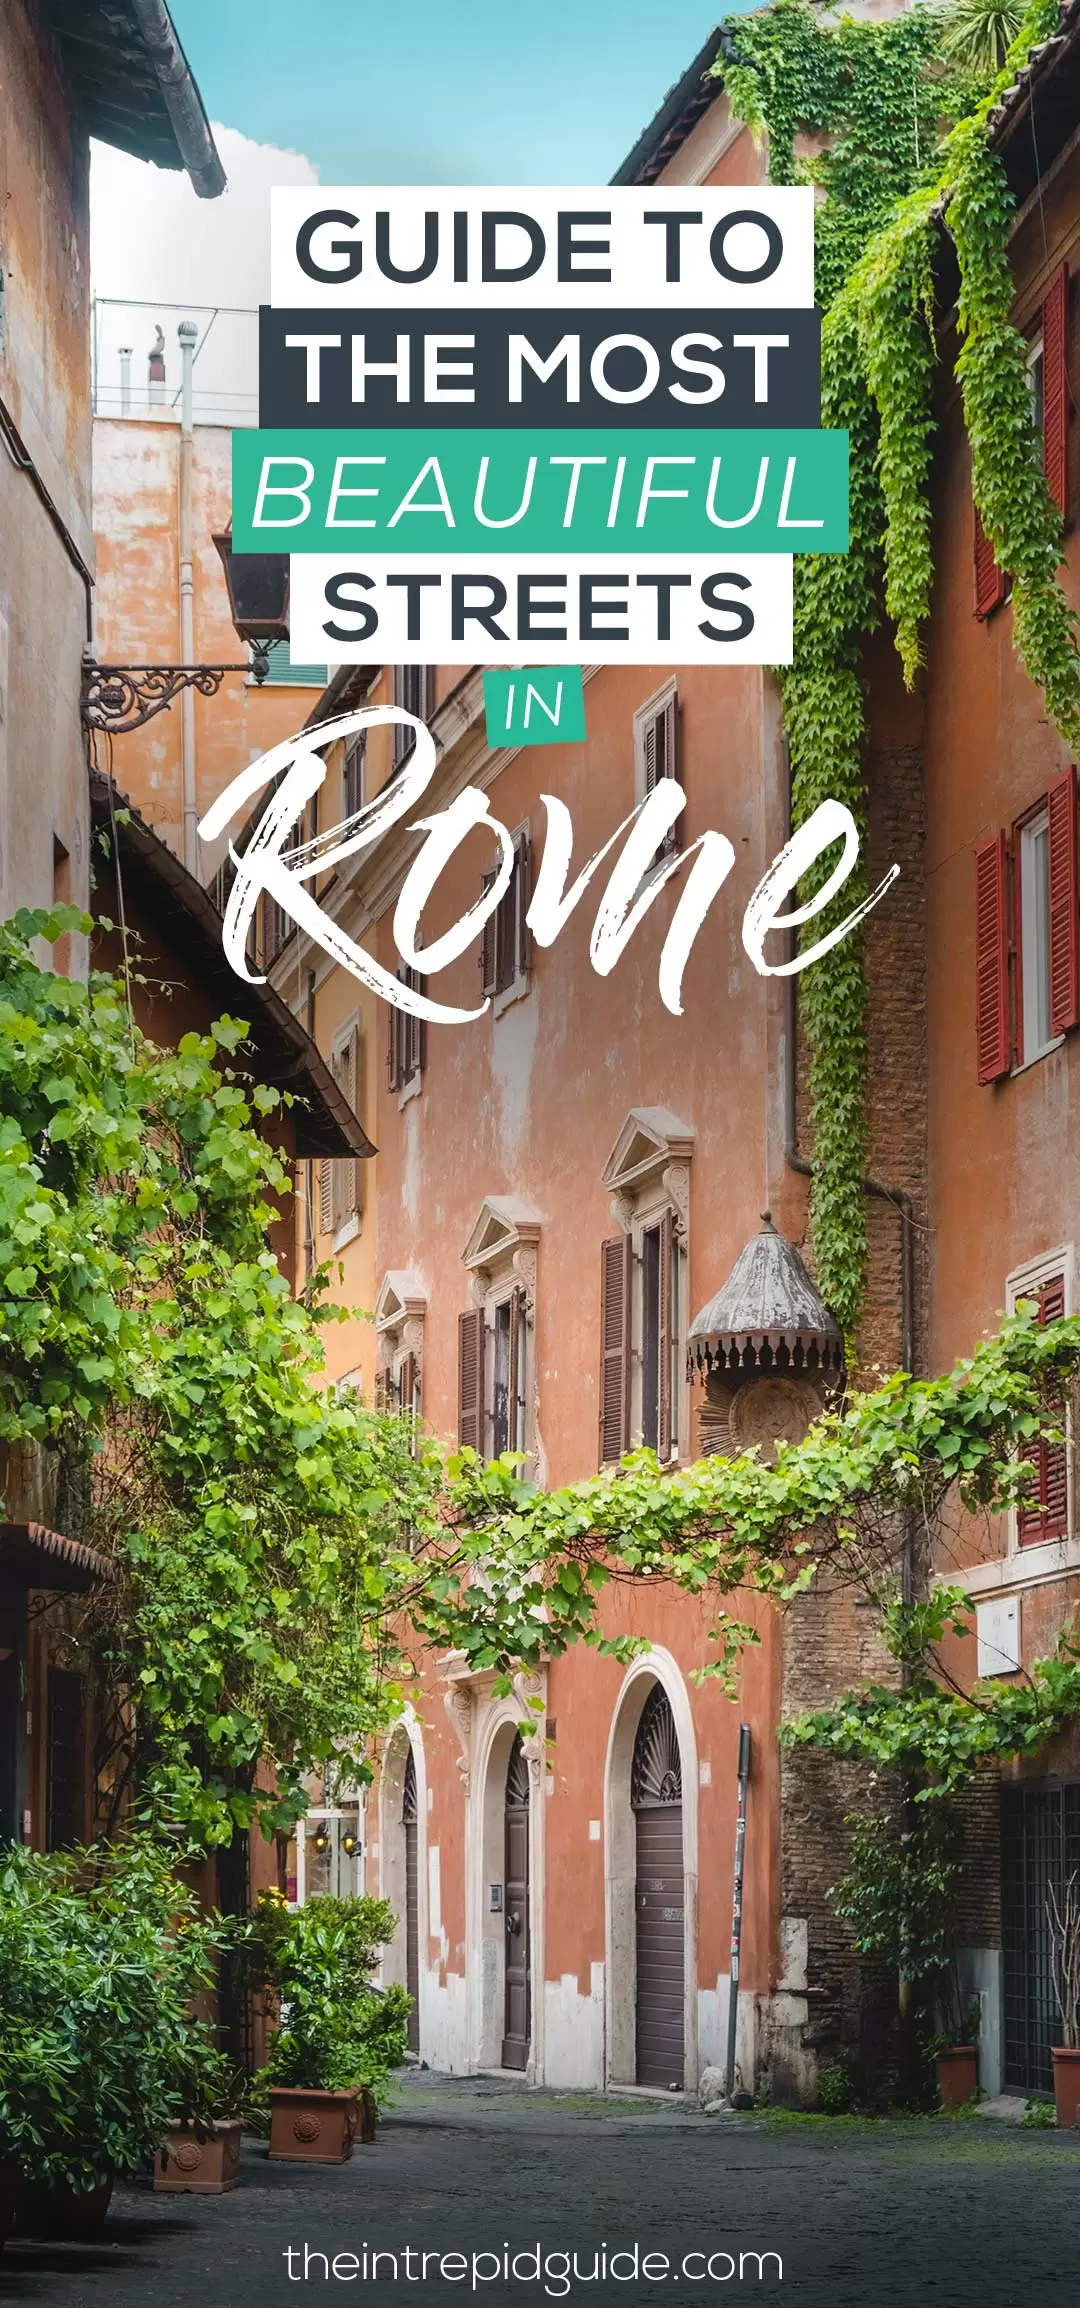 Trastevere walking tour - The Most Beautiful Streets in Rome (itinerary with map)